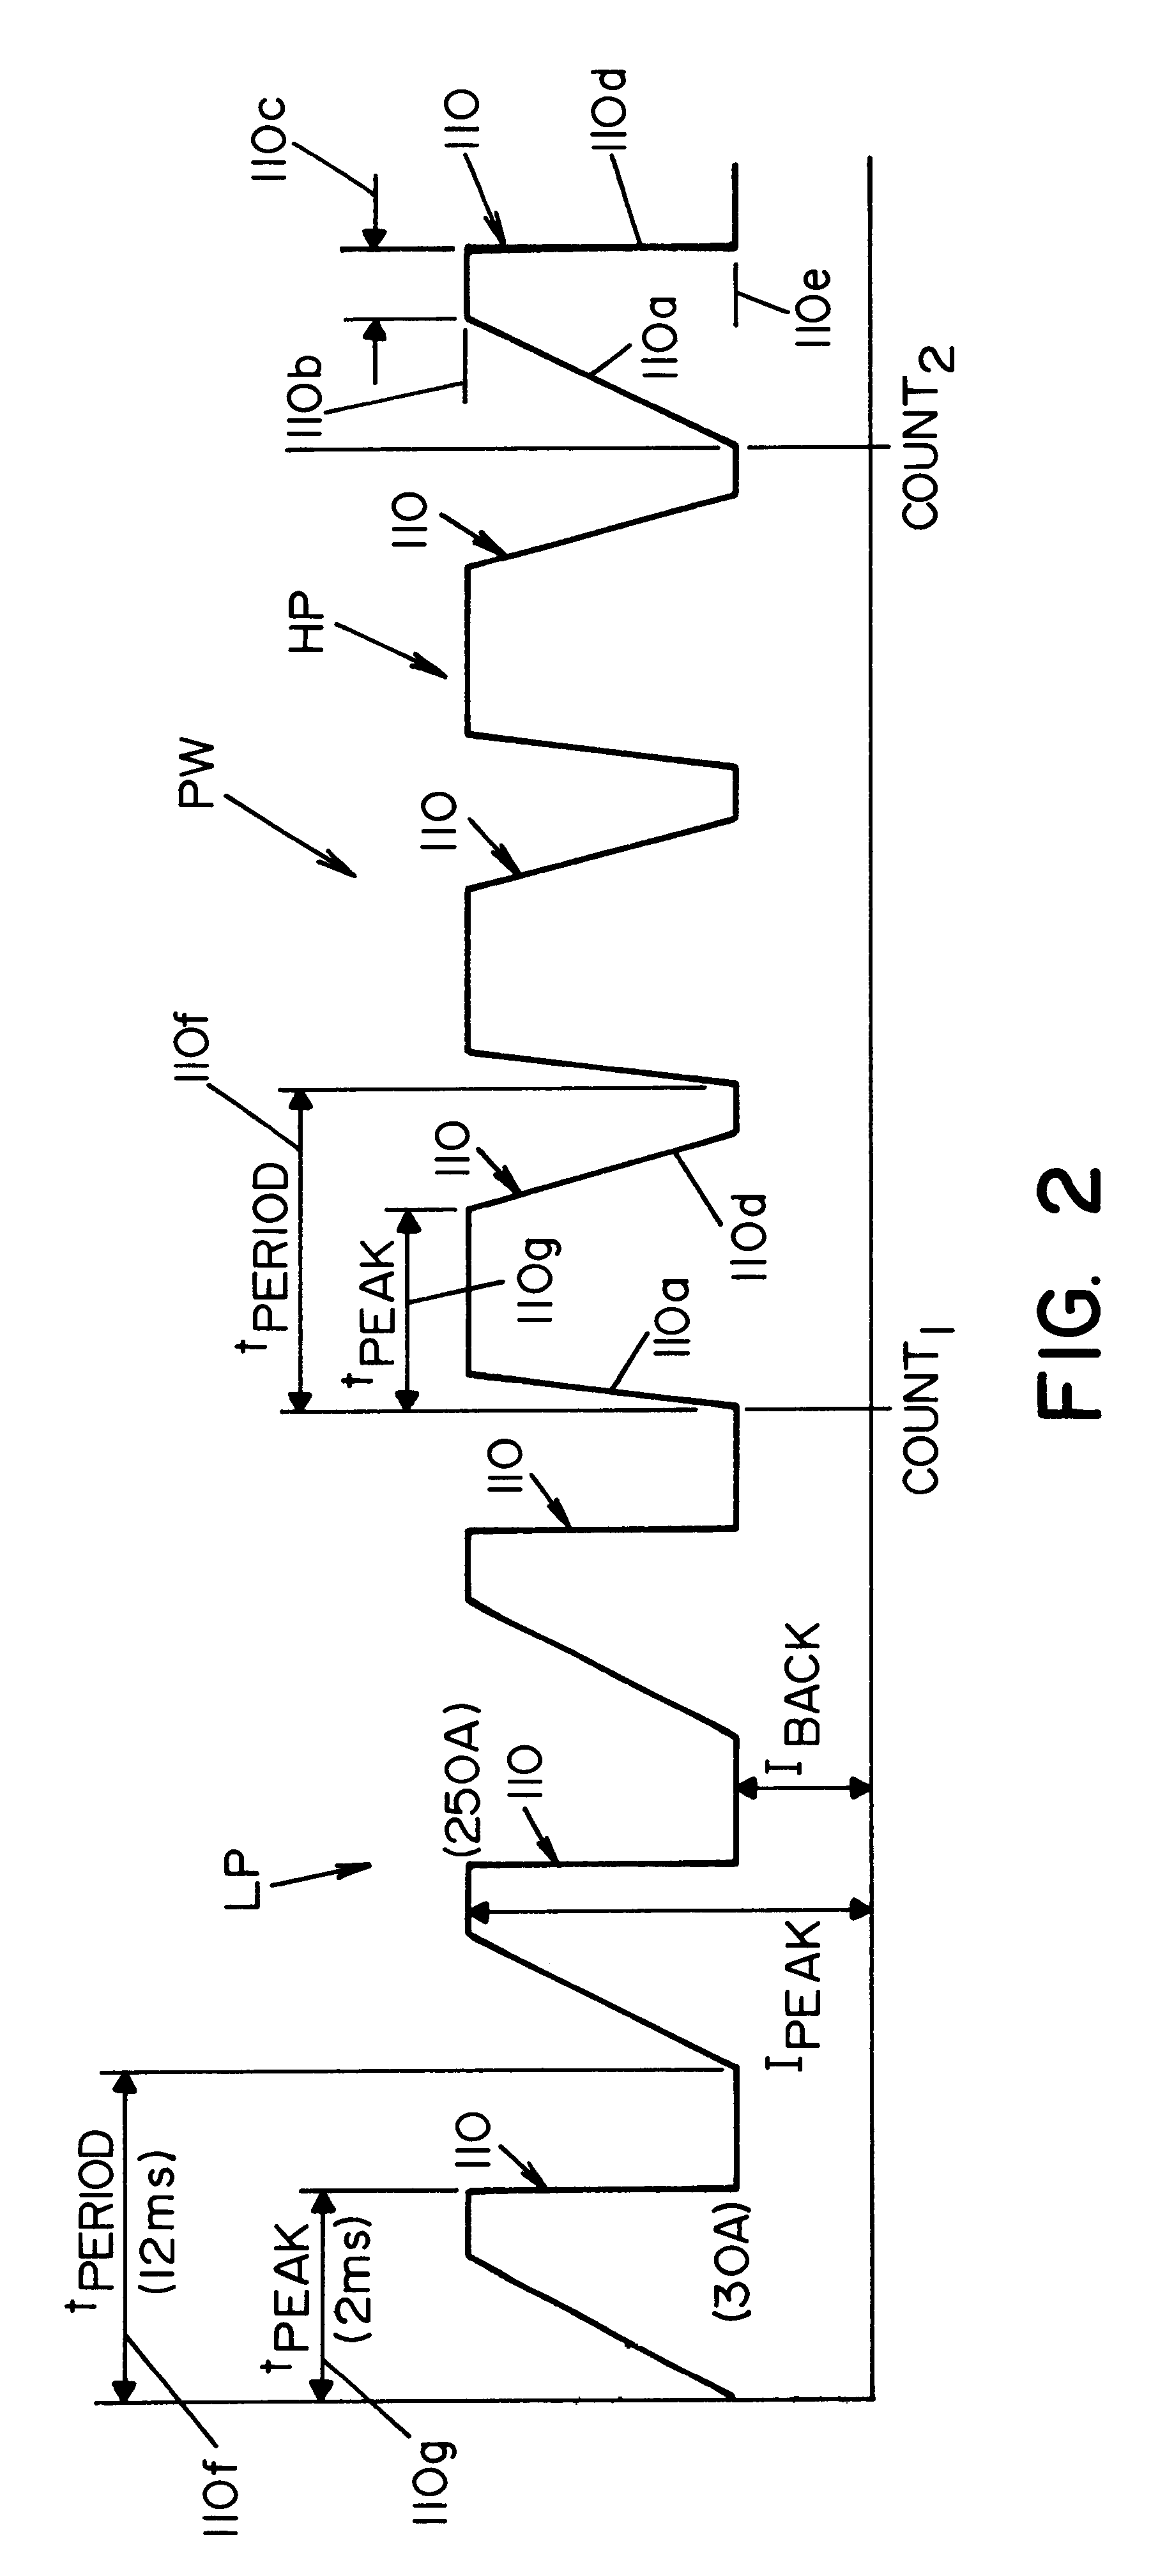 Electric arc welder using high frequency pulses